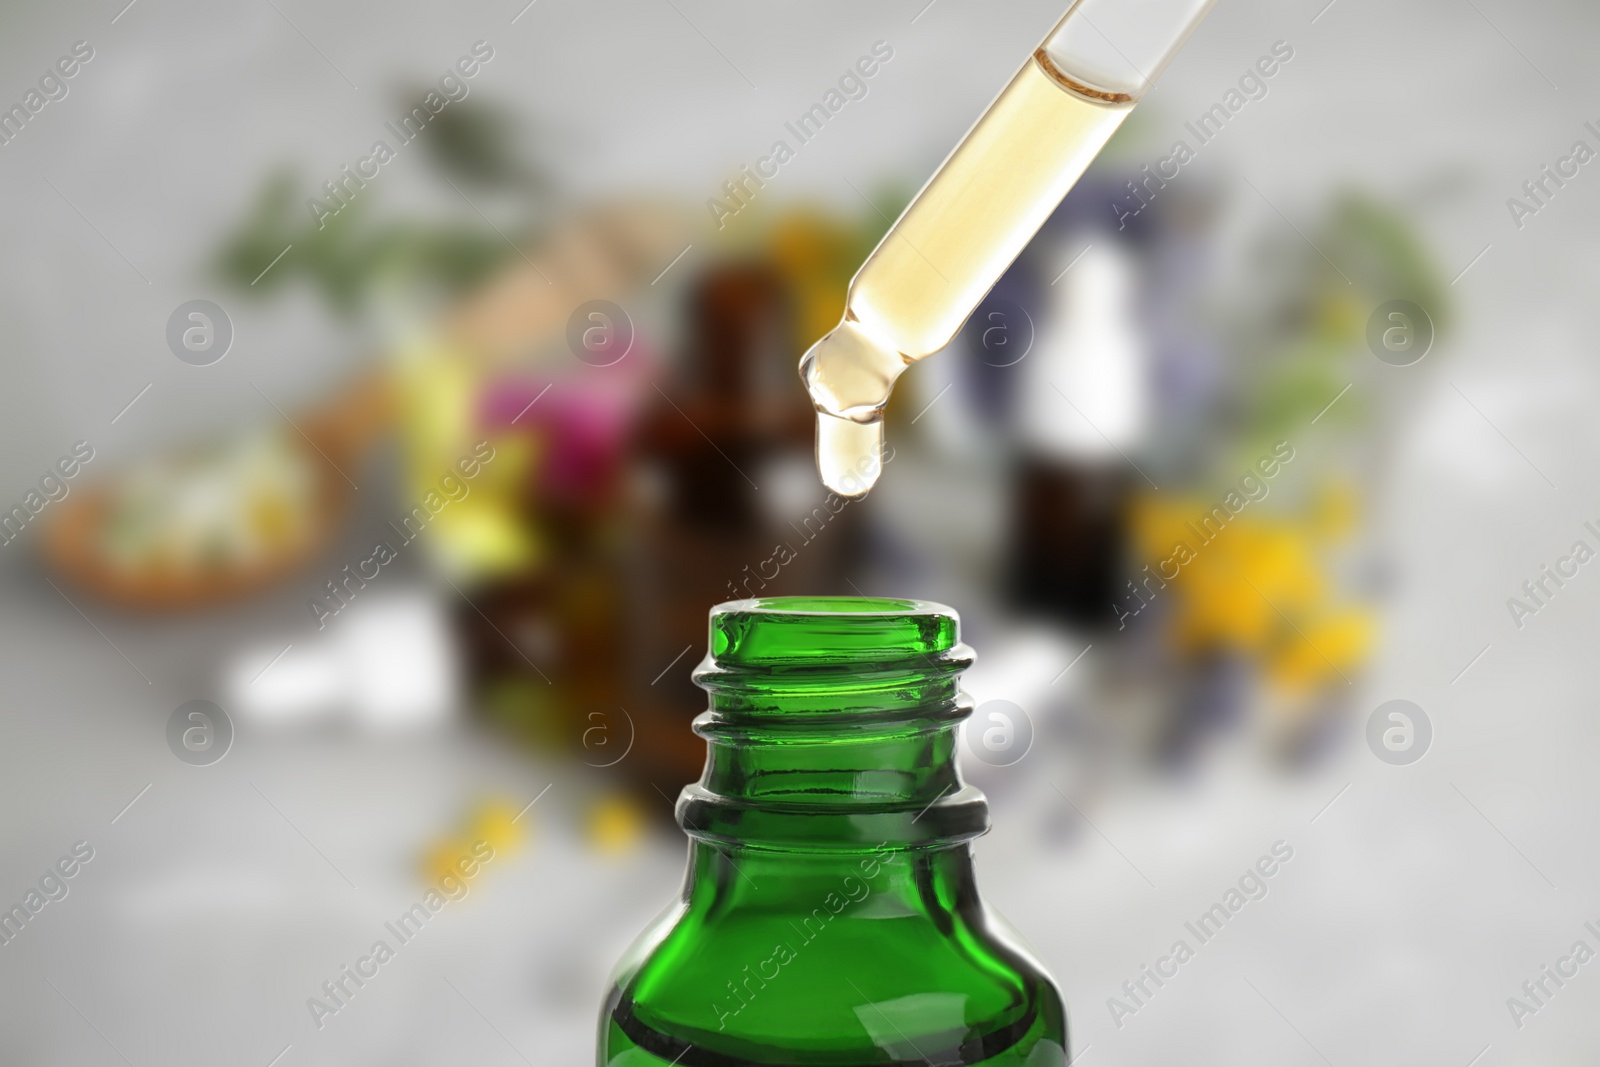 Image of Little bottle with essential oil and dropper against blurred background 